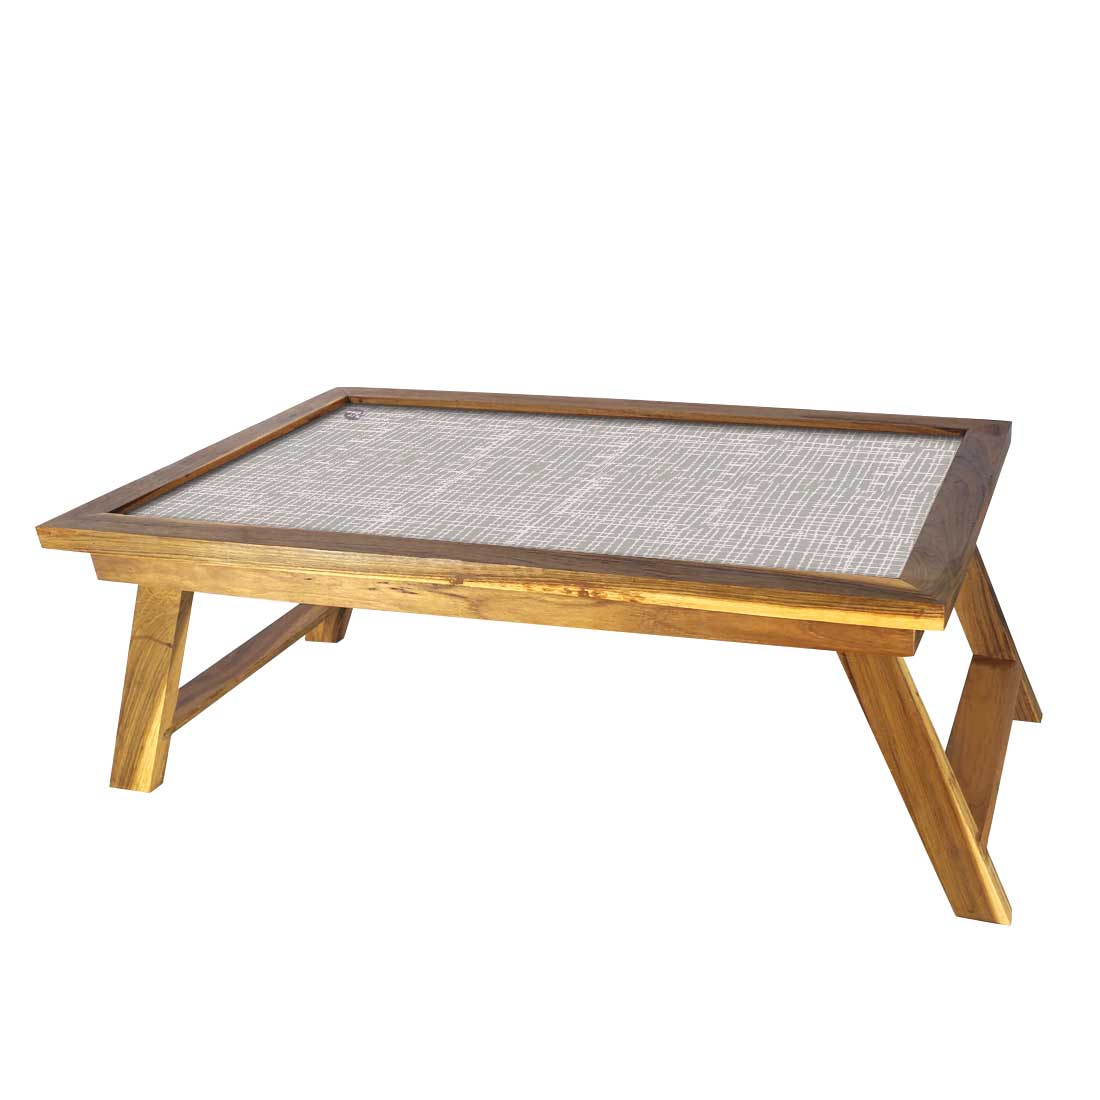 Wooden Laptop Table for Bed Breakfast Tables Study Desk - Grey Lines Nutcase